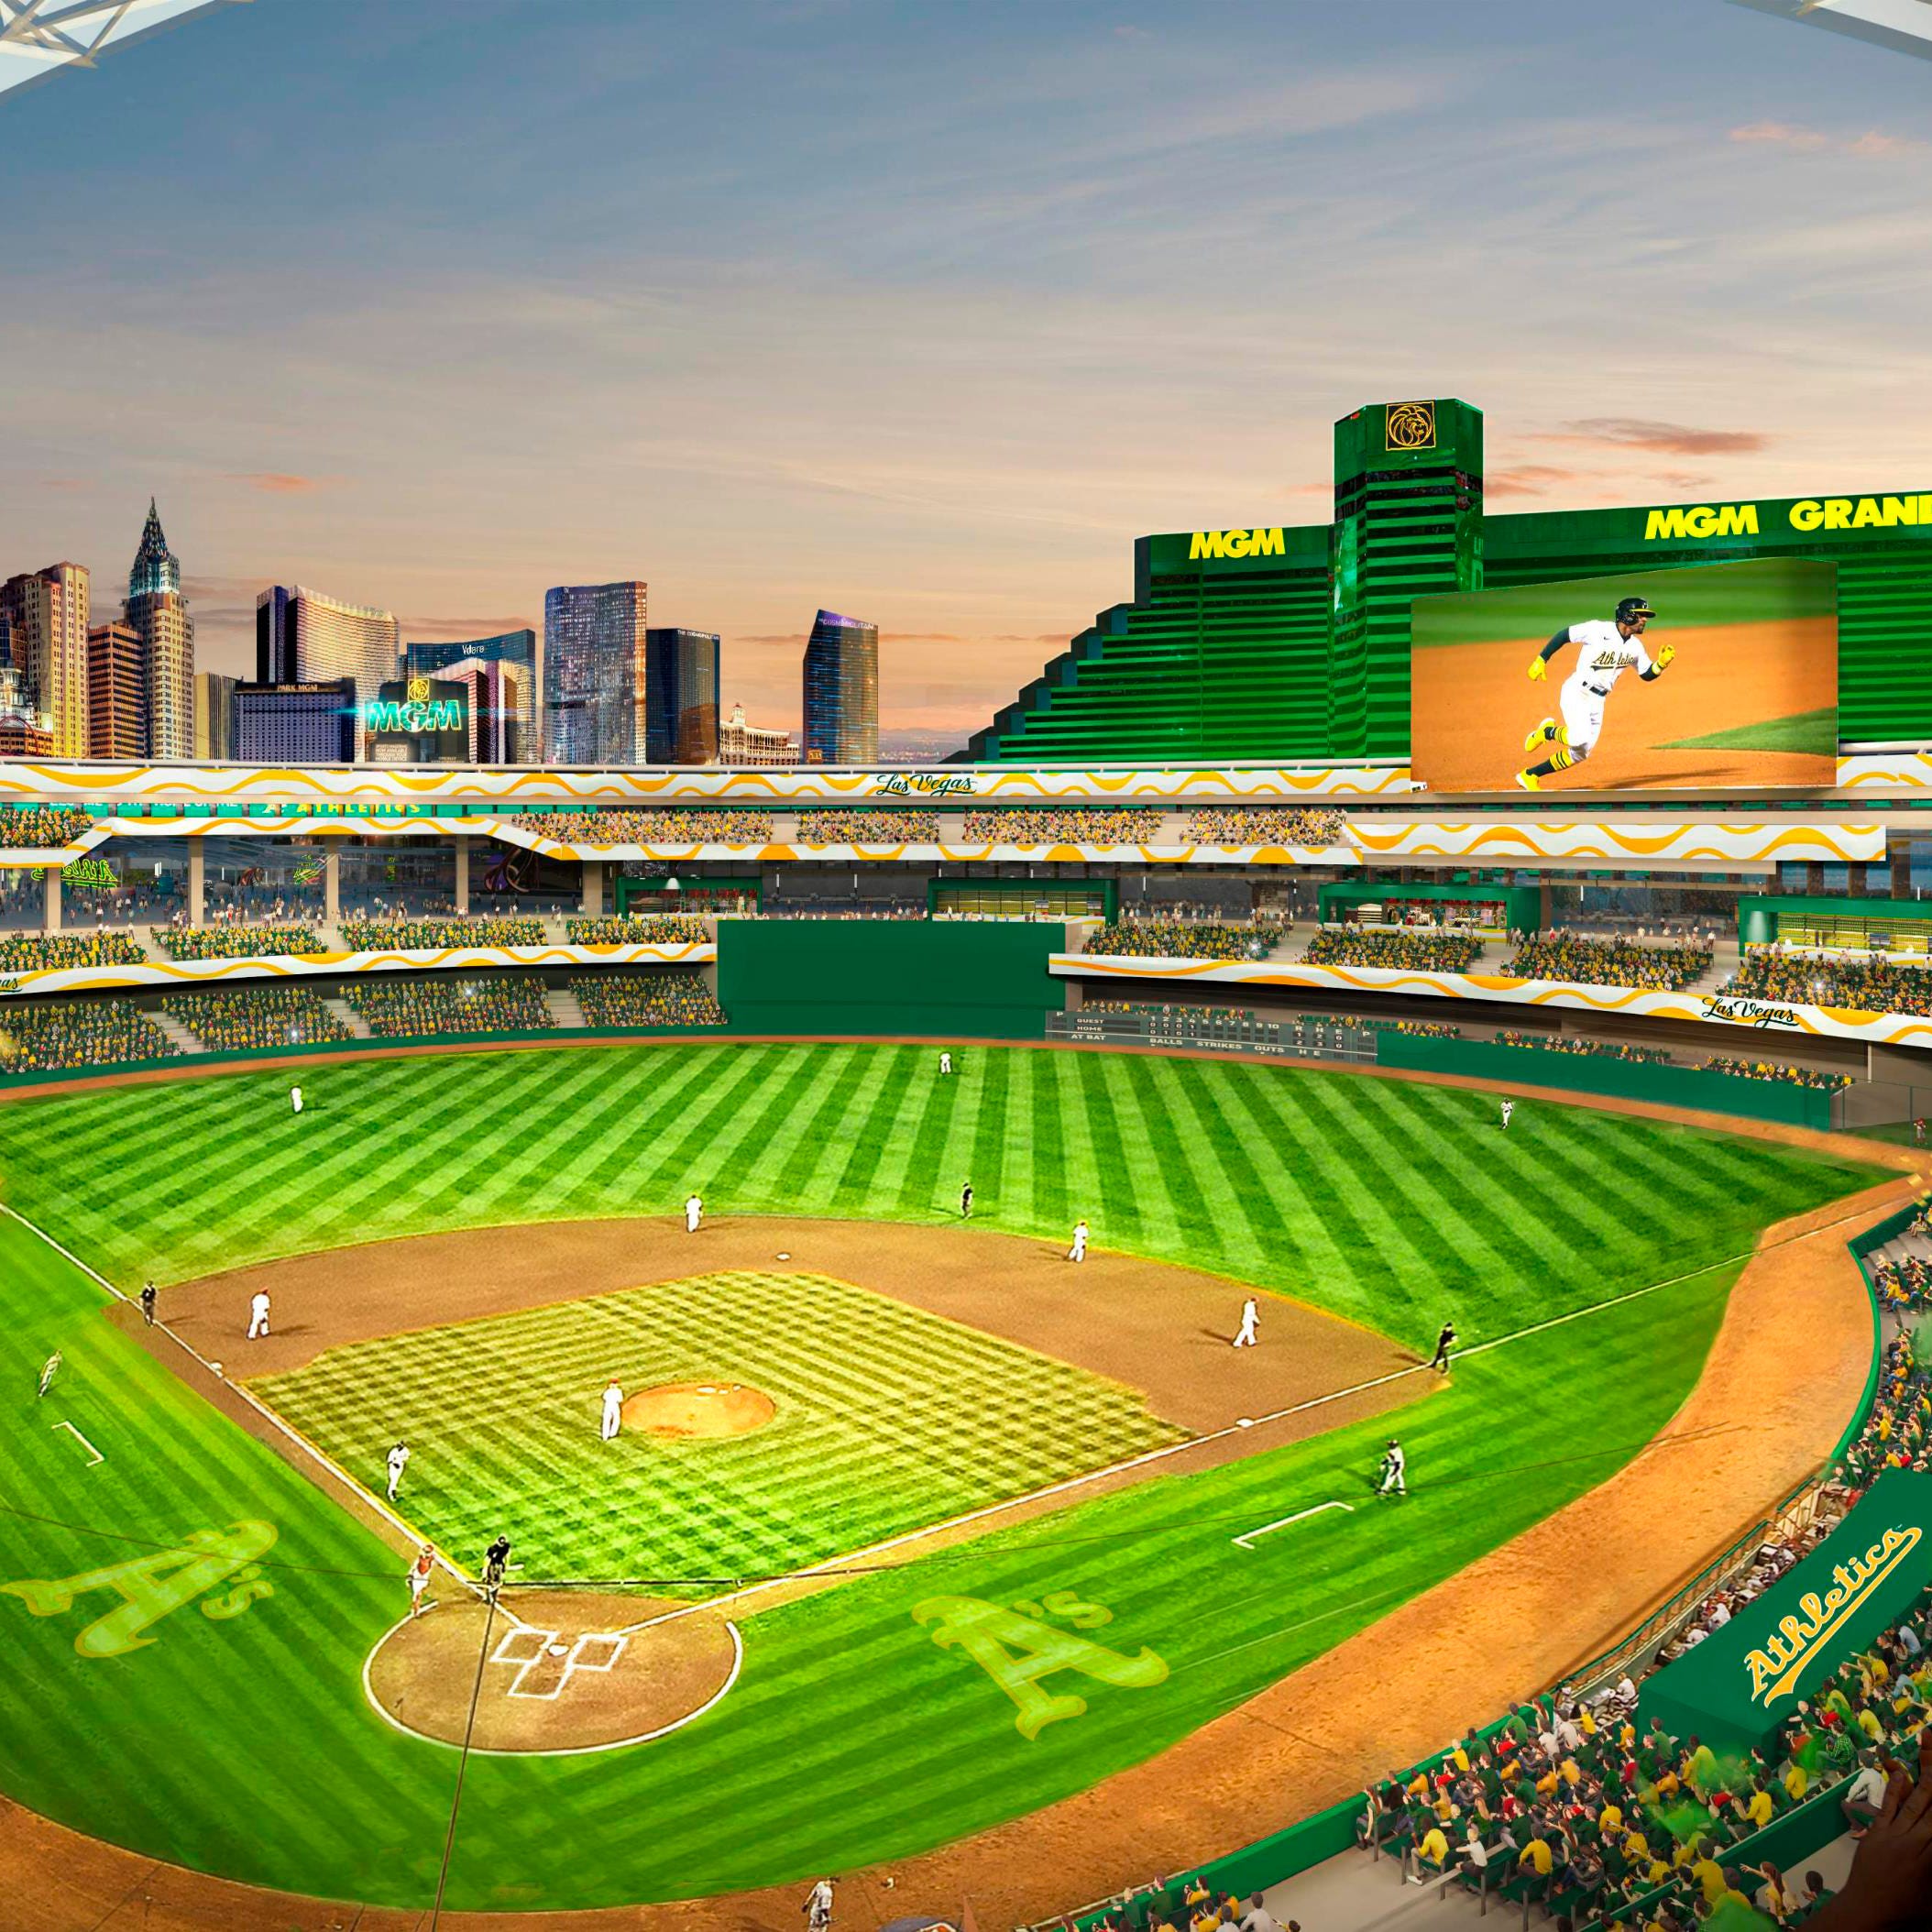 Rendering of the proposed new ballpark at the Tropicana site in Las Vegas.